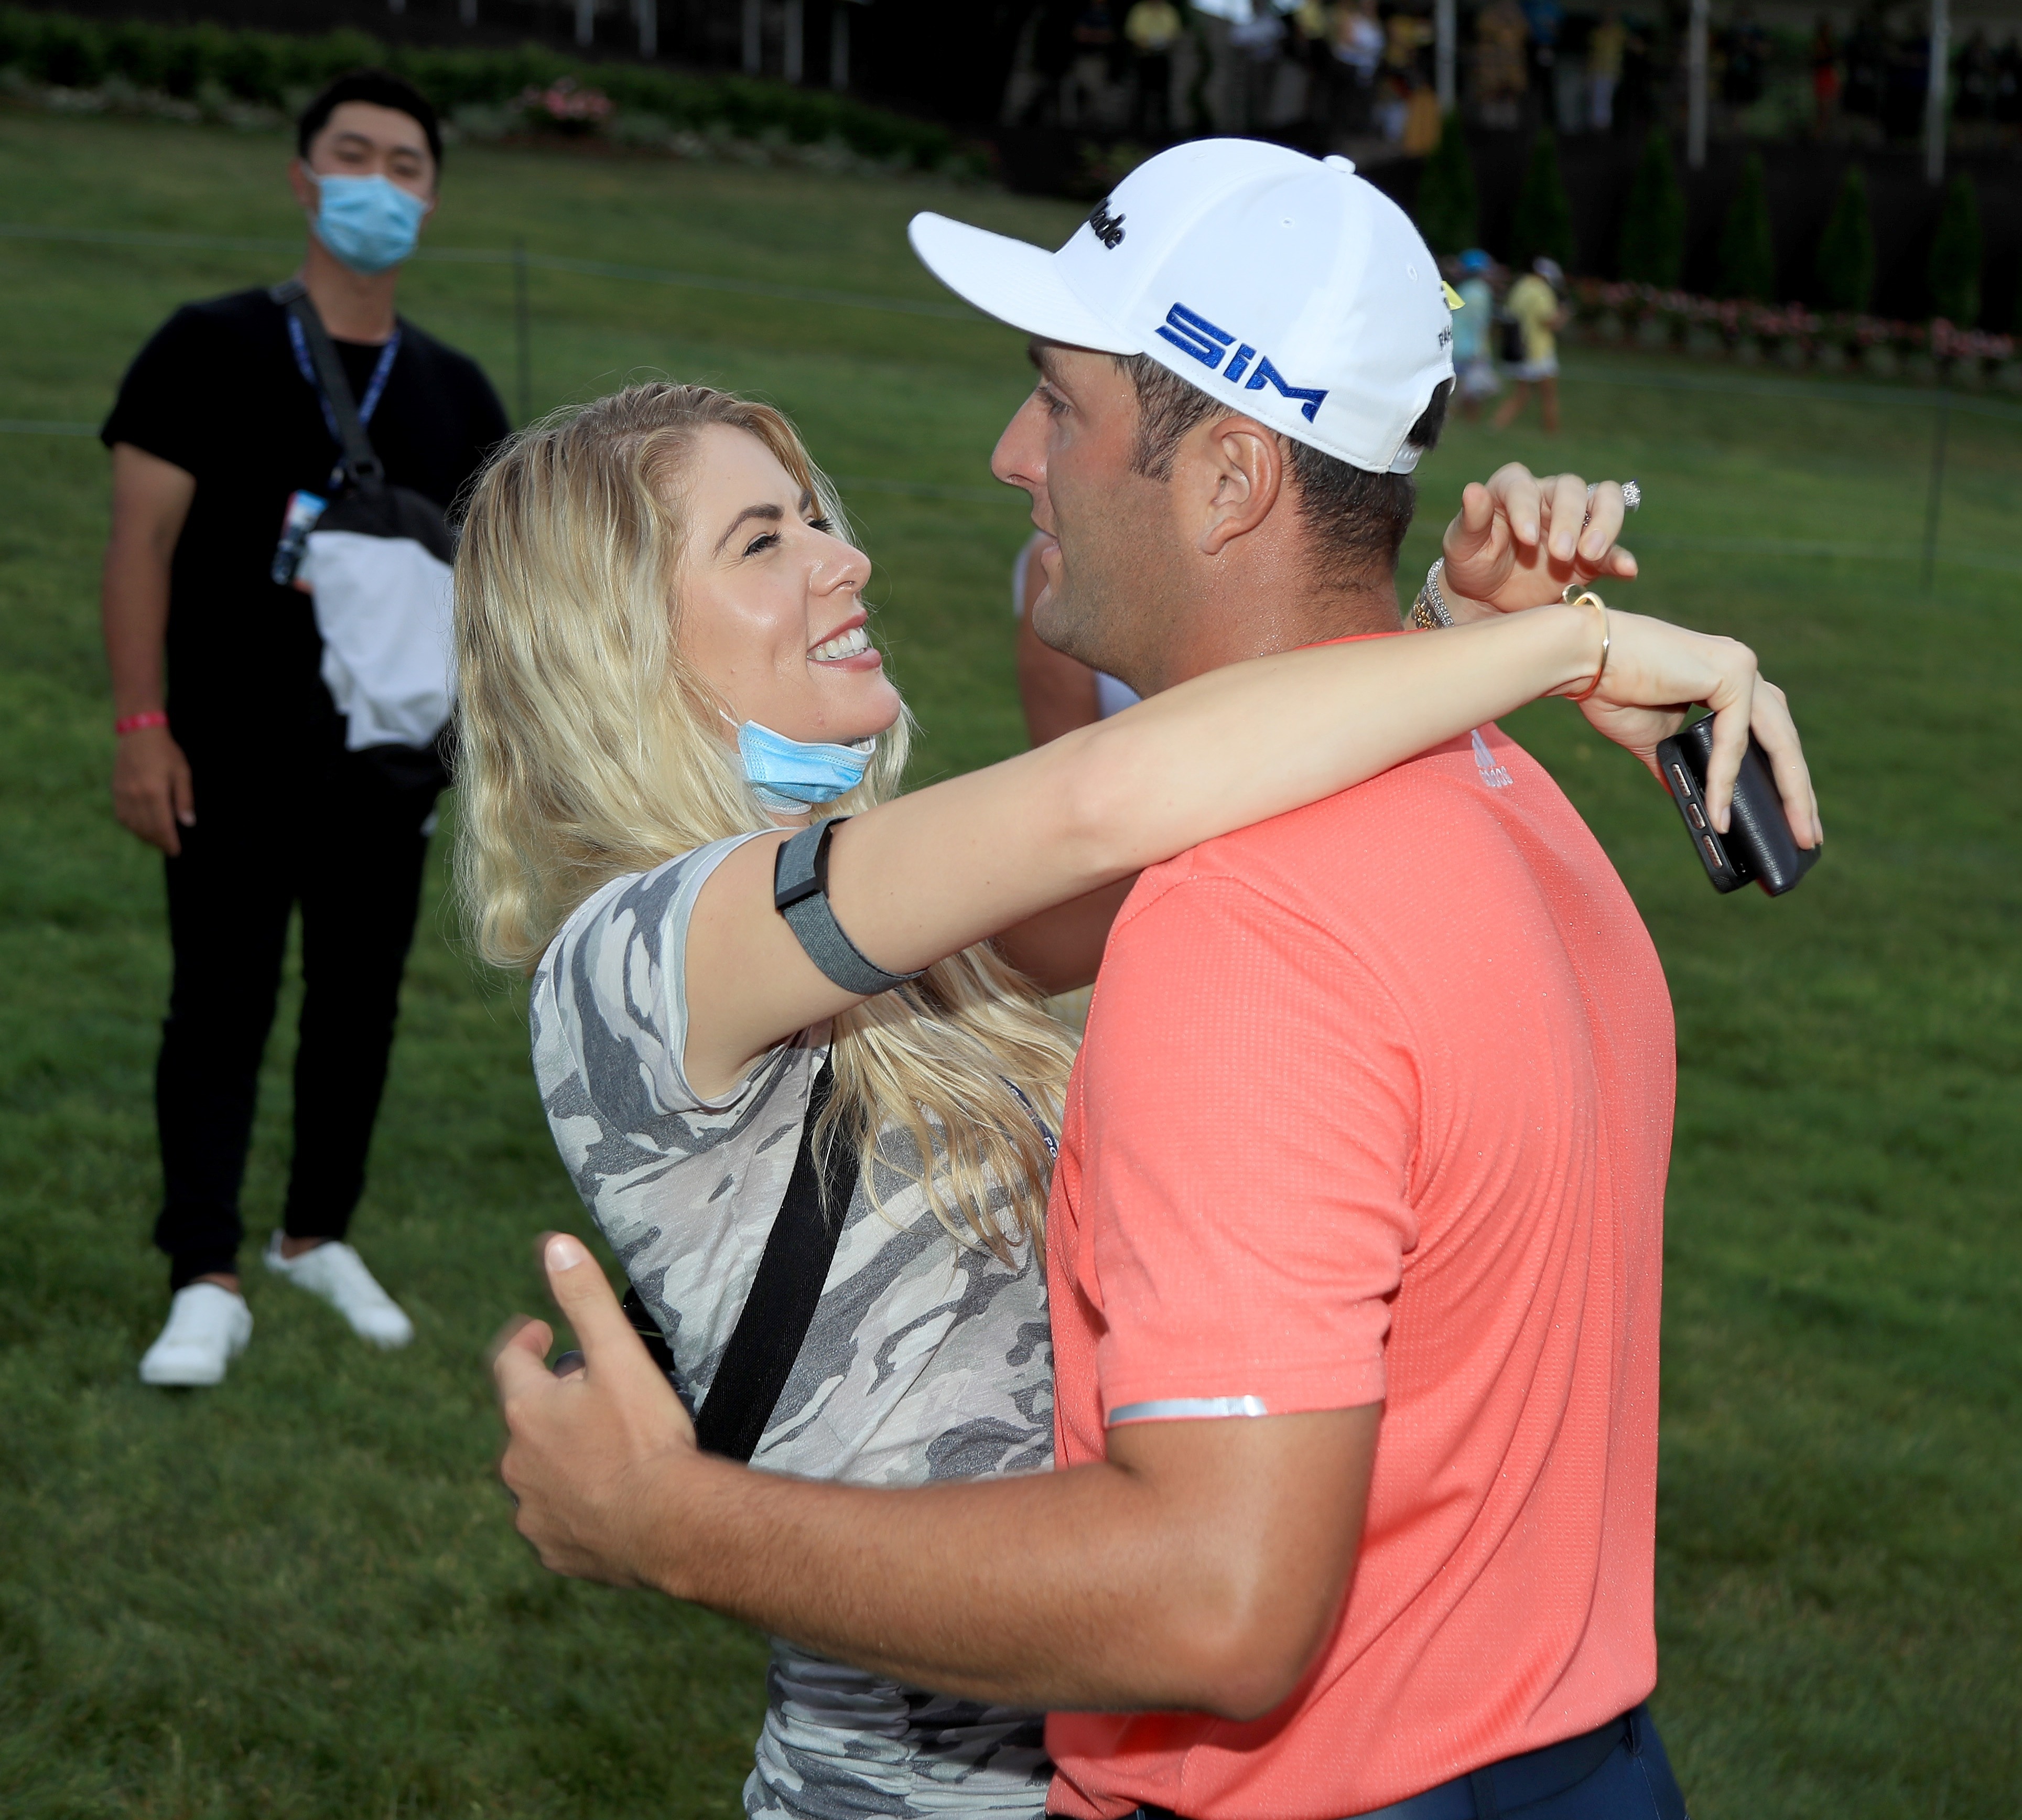 , Brooks Koepka vs Jon Rahm lifestyles compared, from combined £52m fortune to glam Wags as they face off in Masters